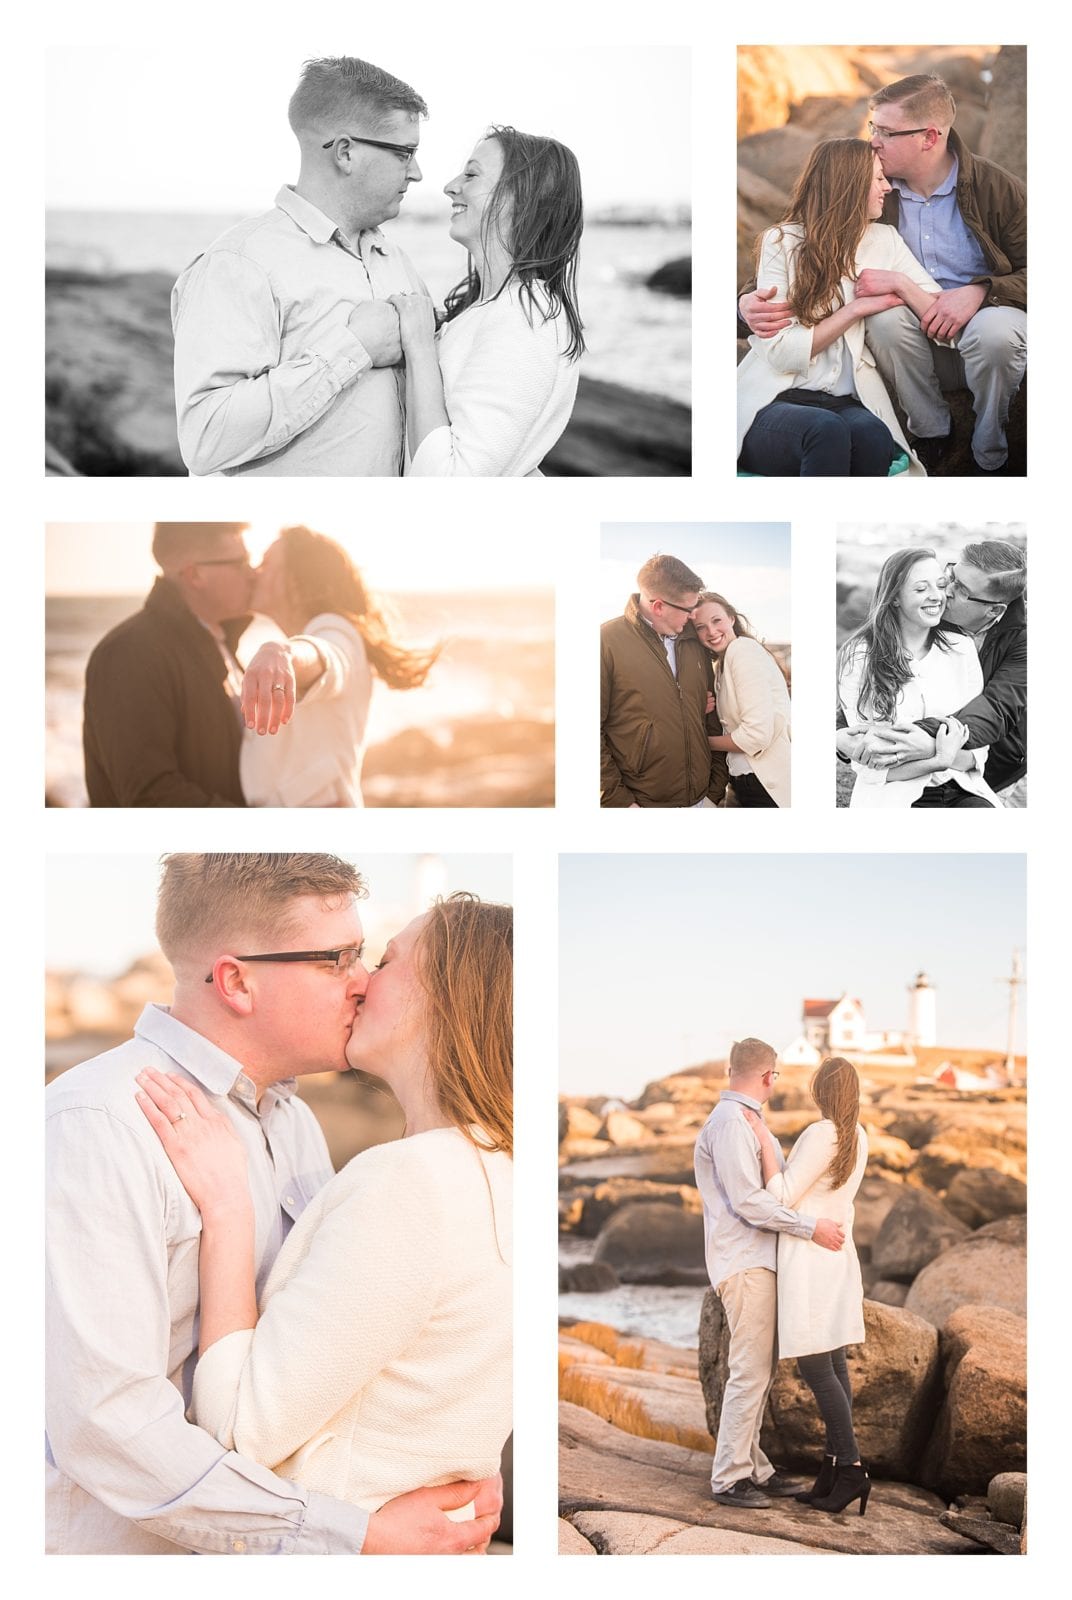 tracey and sean's dreamy engagement session at Nubble Lighthouse in January